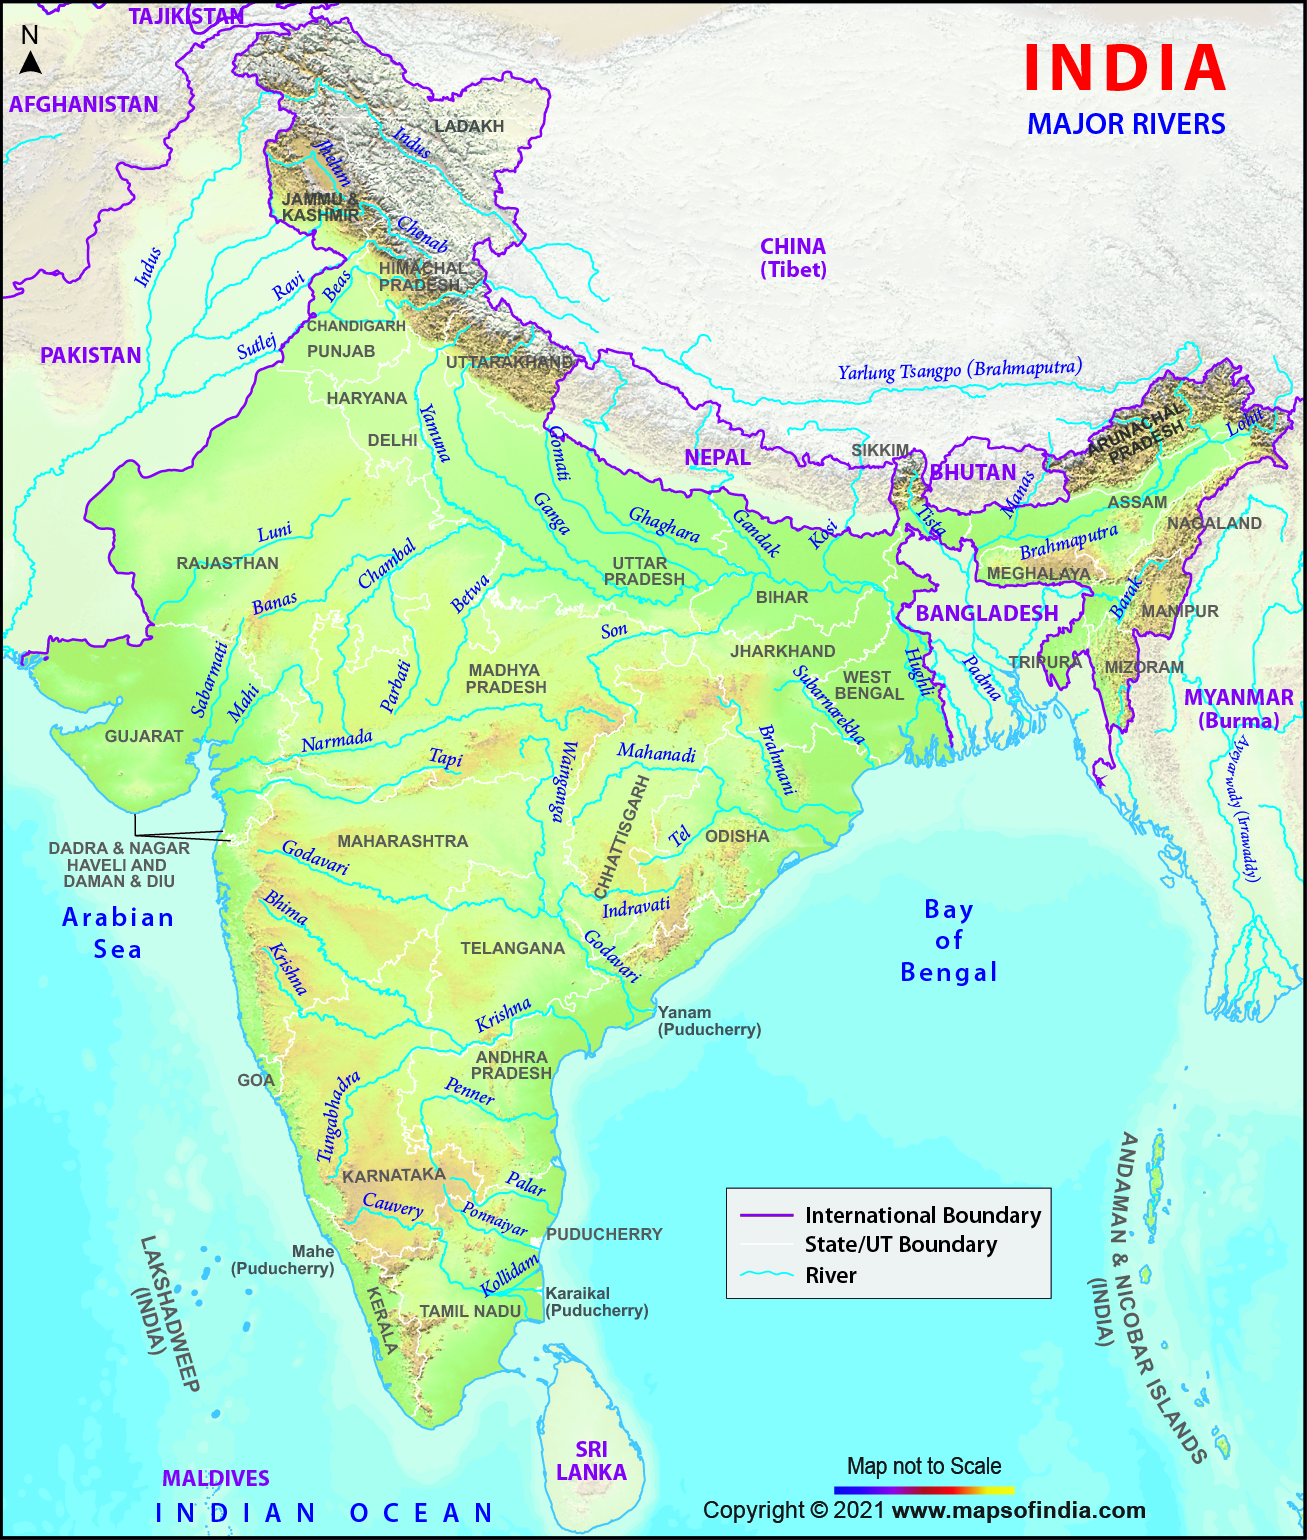 River map of India